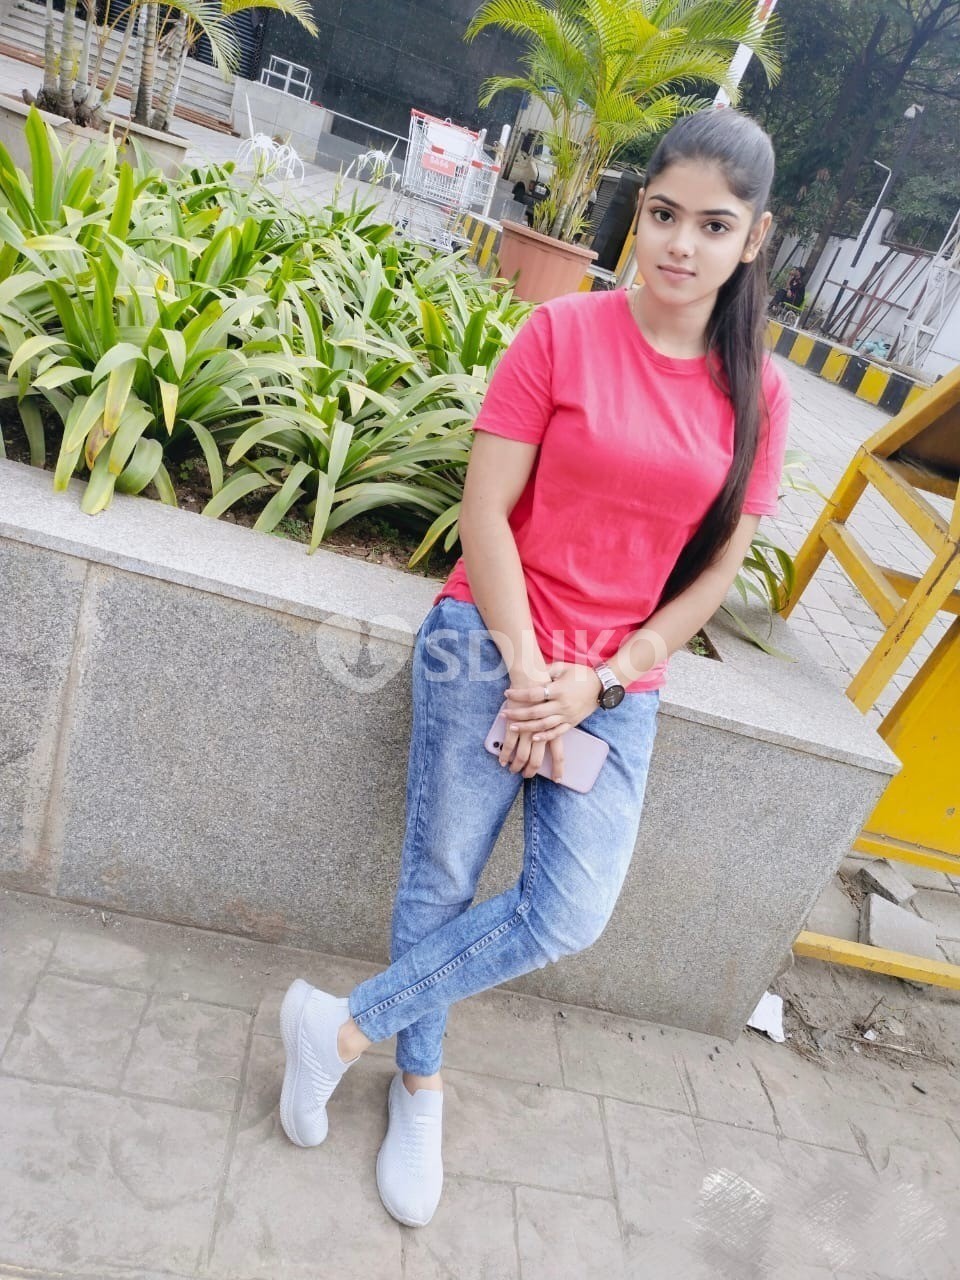 PANVEL↘️ CLICK HERE ↙️95086//28989 GENUINE PERSON ♥️ ONLY FOR SEX INDEPENDENT GIRLS FULL TIME INJOY